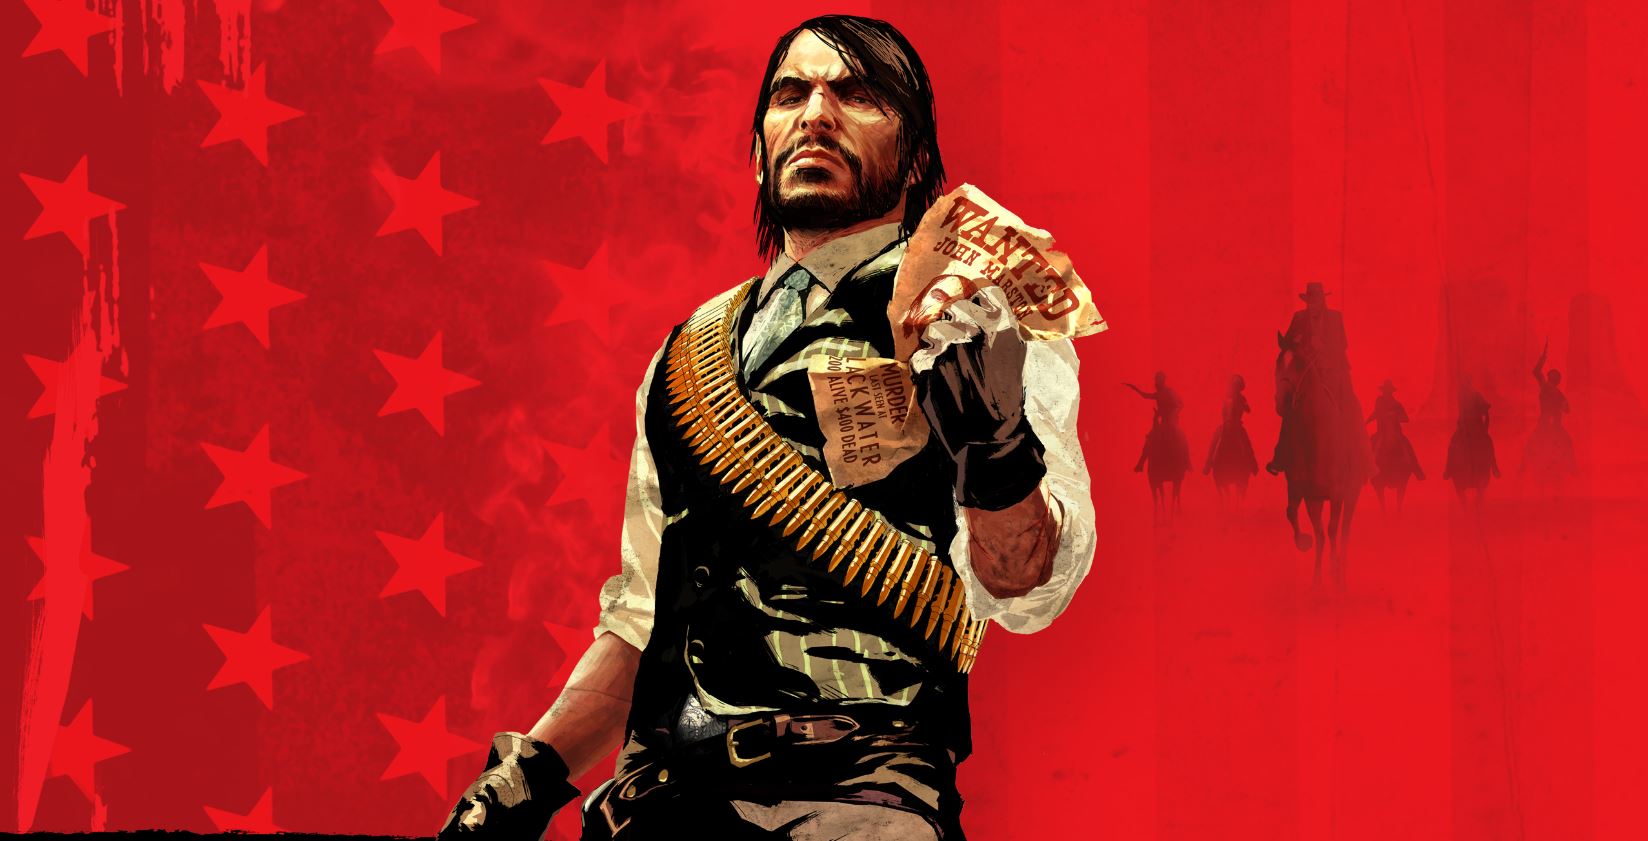 Rockstar Games on X: Red Dead Redemption for Nintendo Switch and  PlayStation 4 is now available from the Rockstar Store and other select  retailers for both digital download and physical purchase